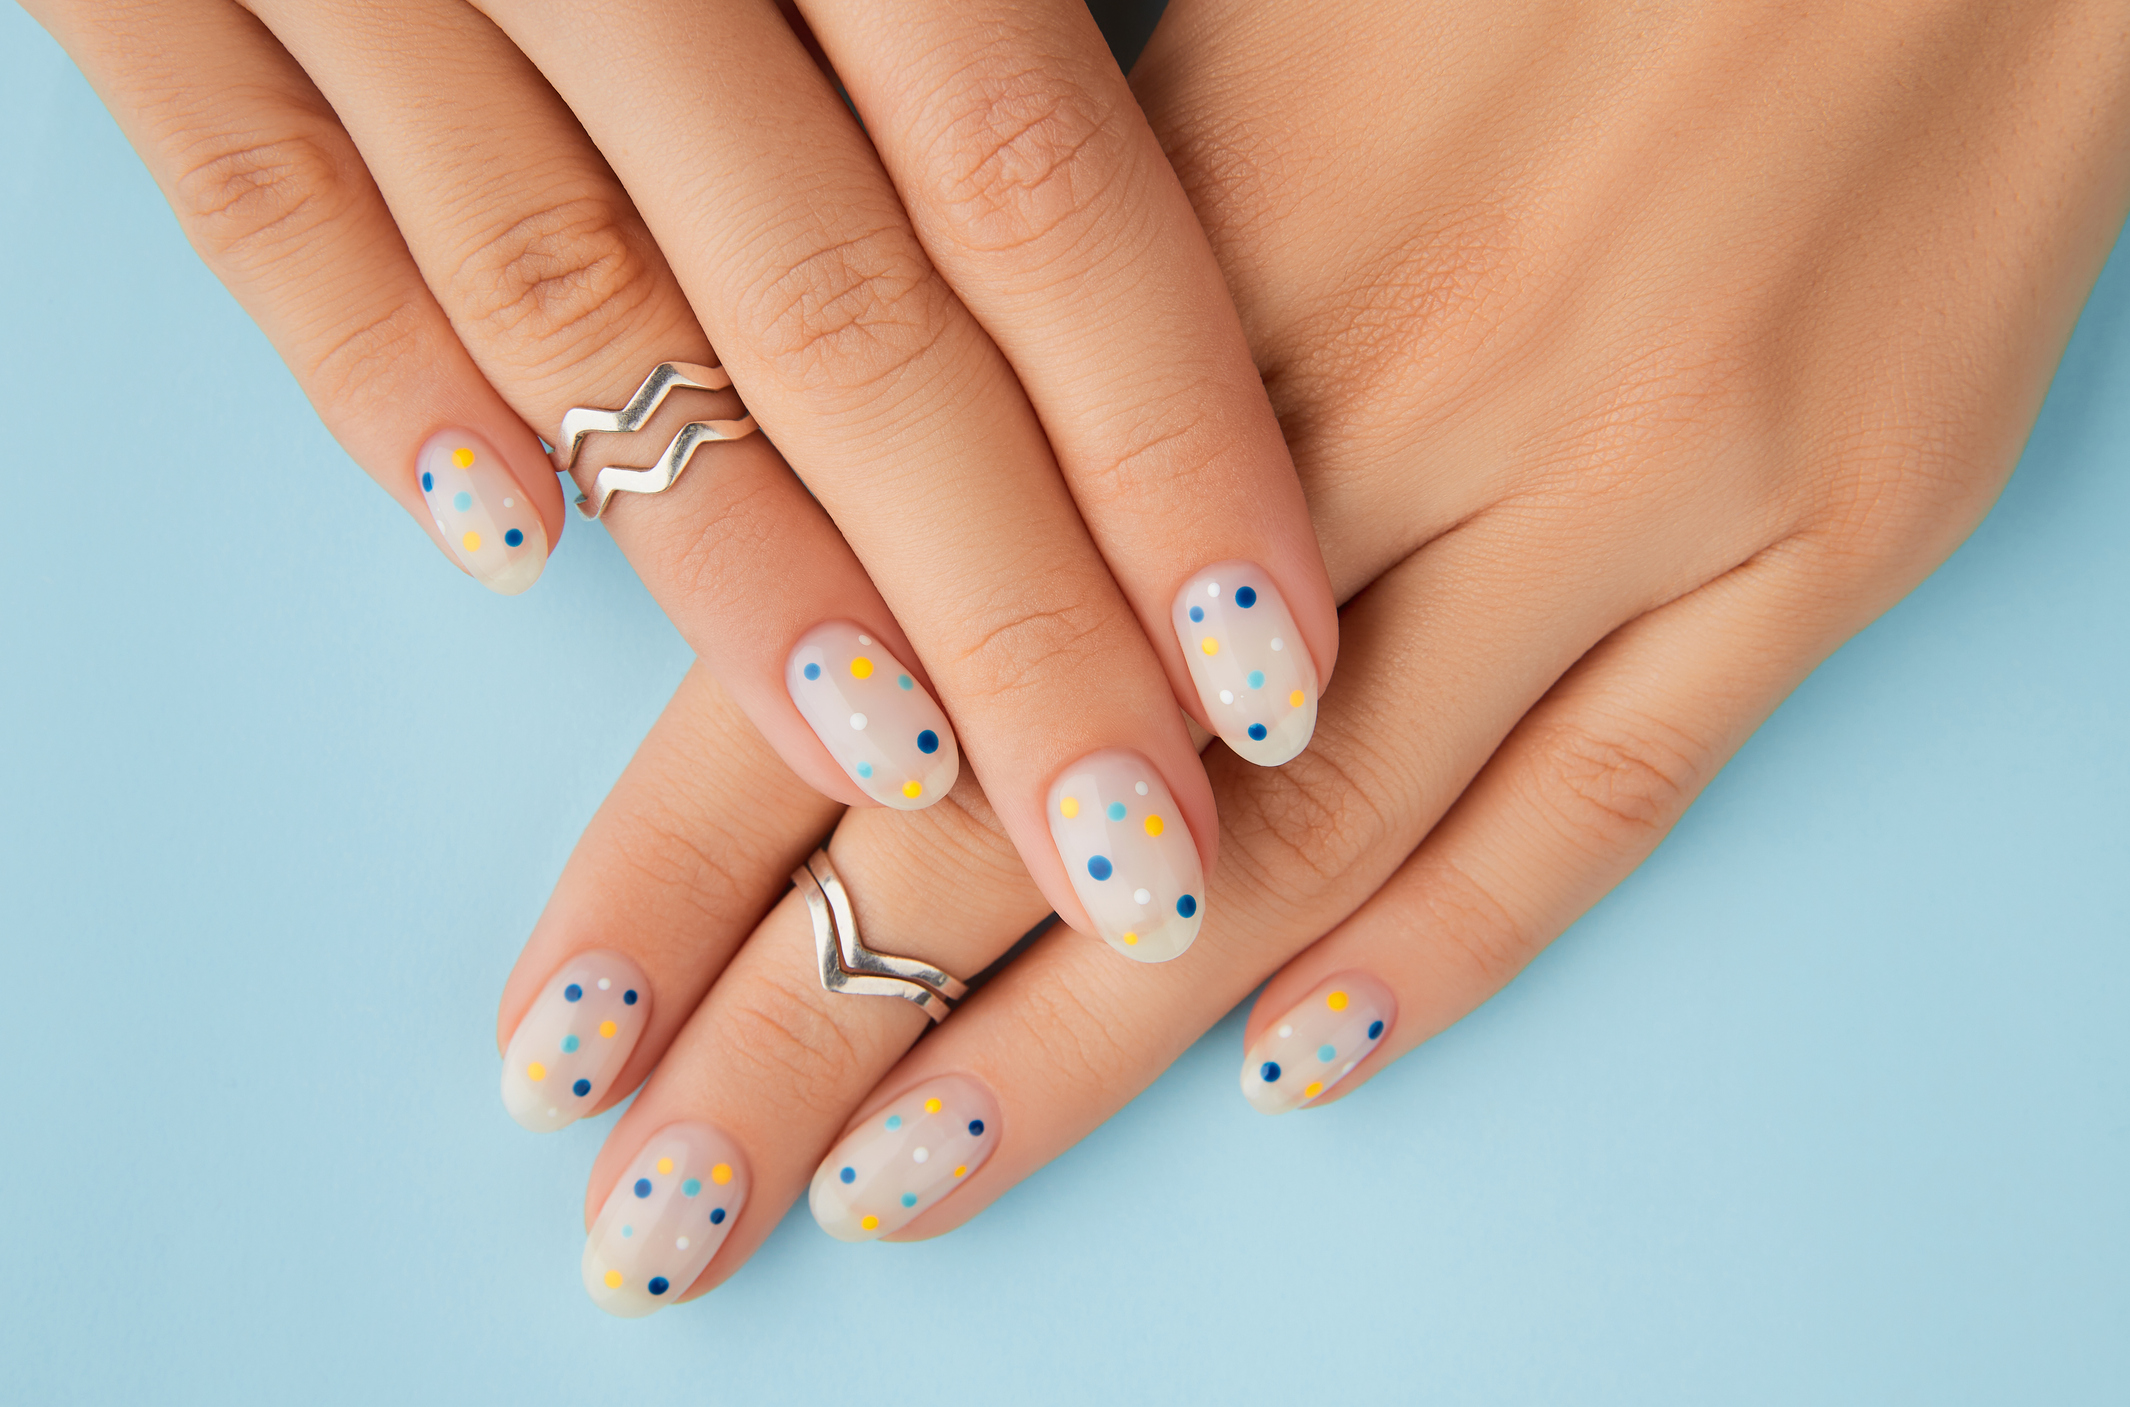 What are some benefits, types, and job opportunities of nail art courses?